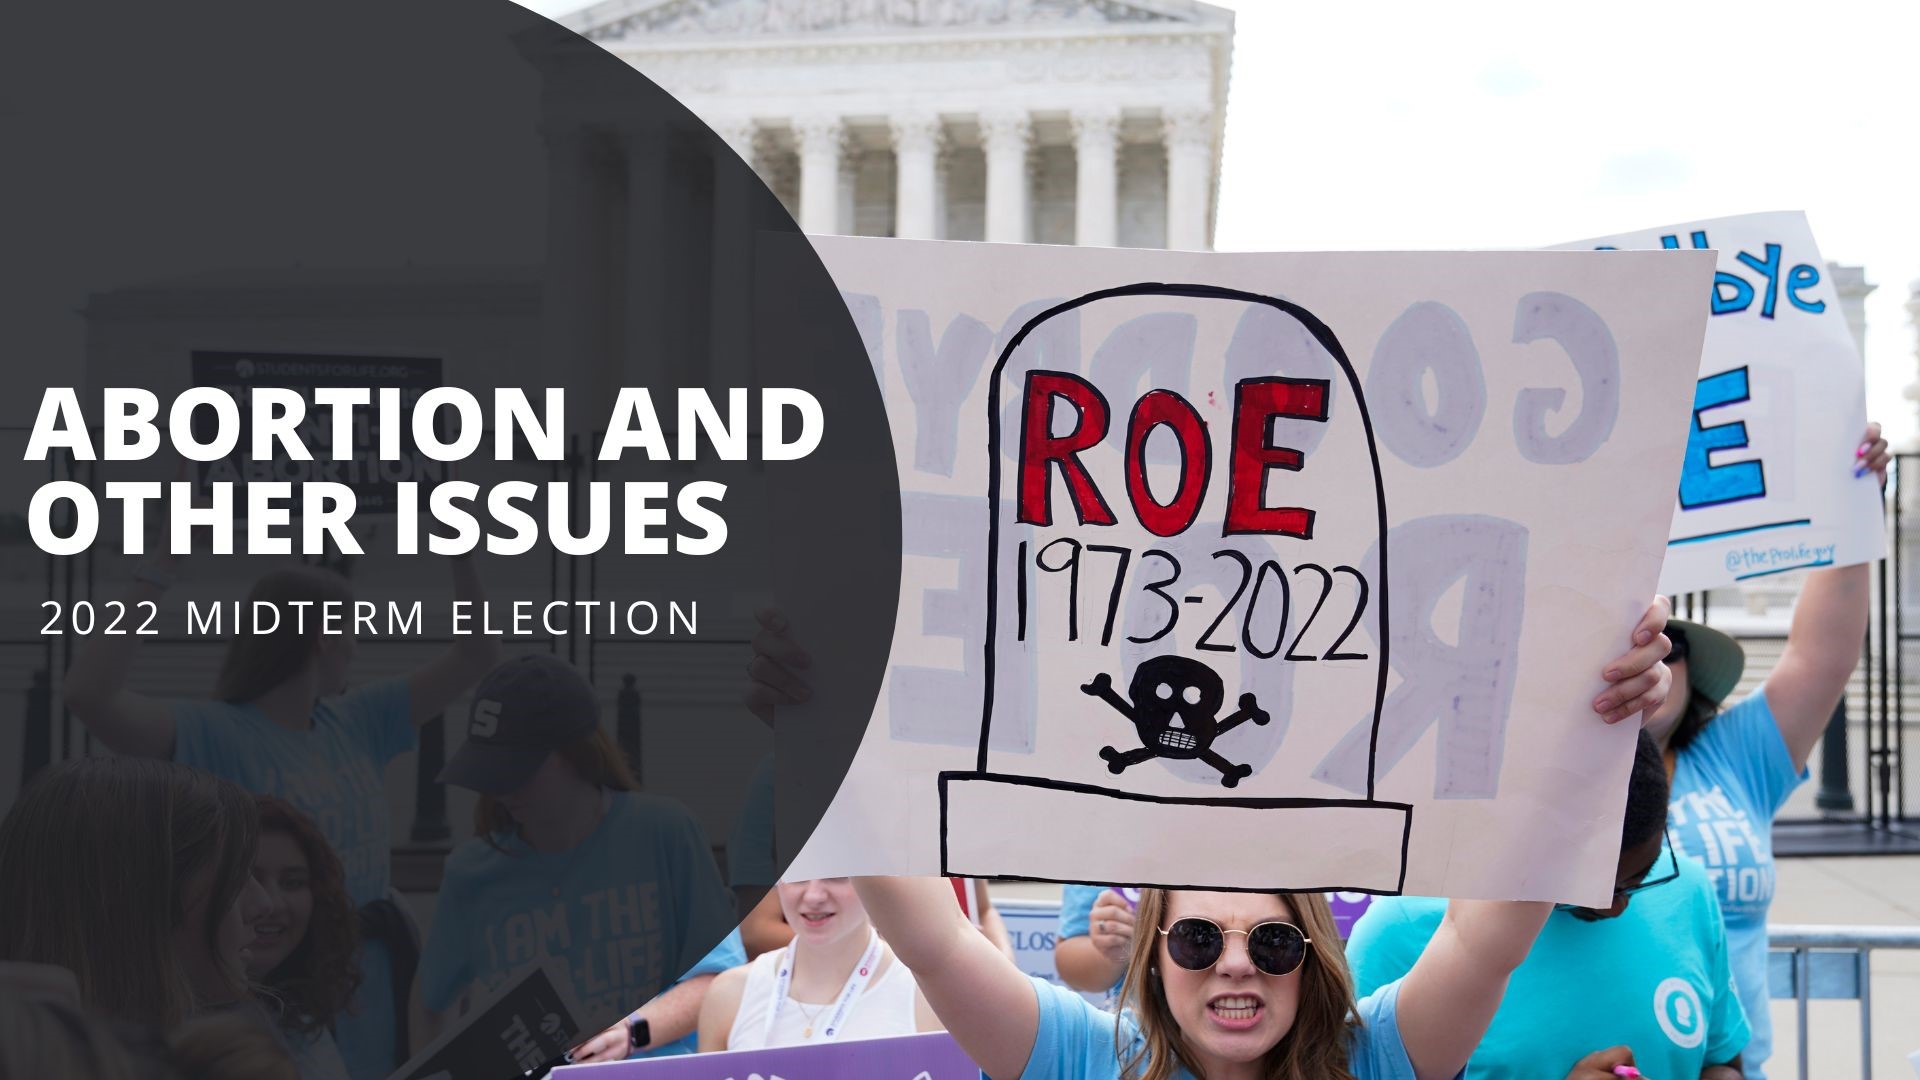 Exploring some of the key issues of the 2022 midterm elections from abortion to recreational marijuana and proof of citizenship for immigrants and gun laws.